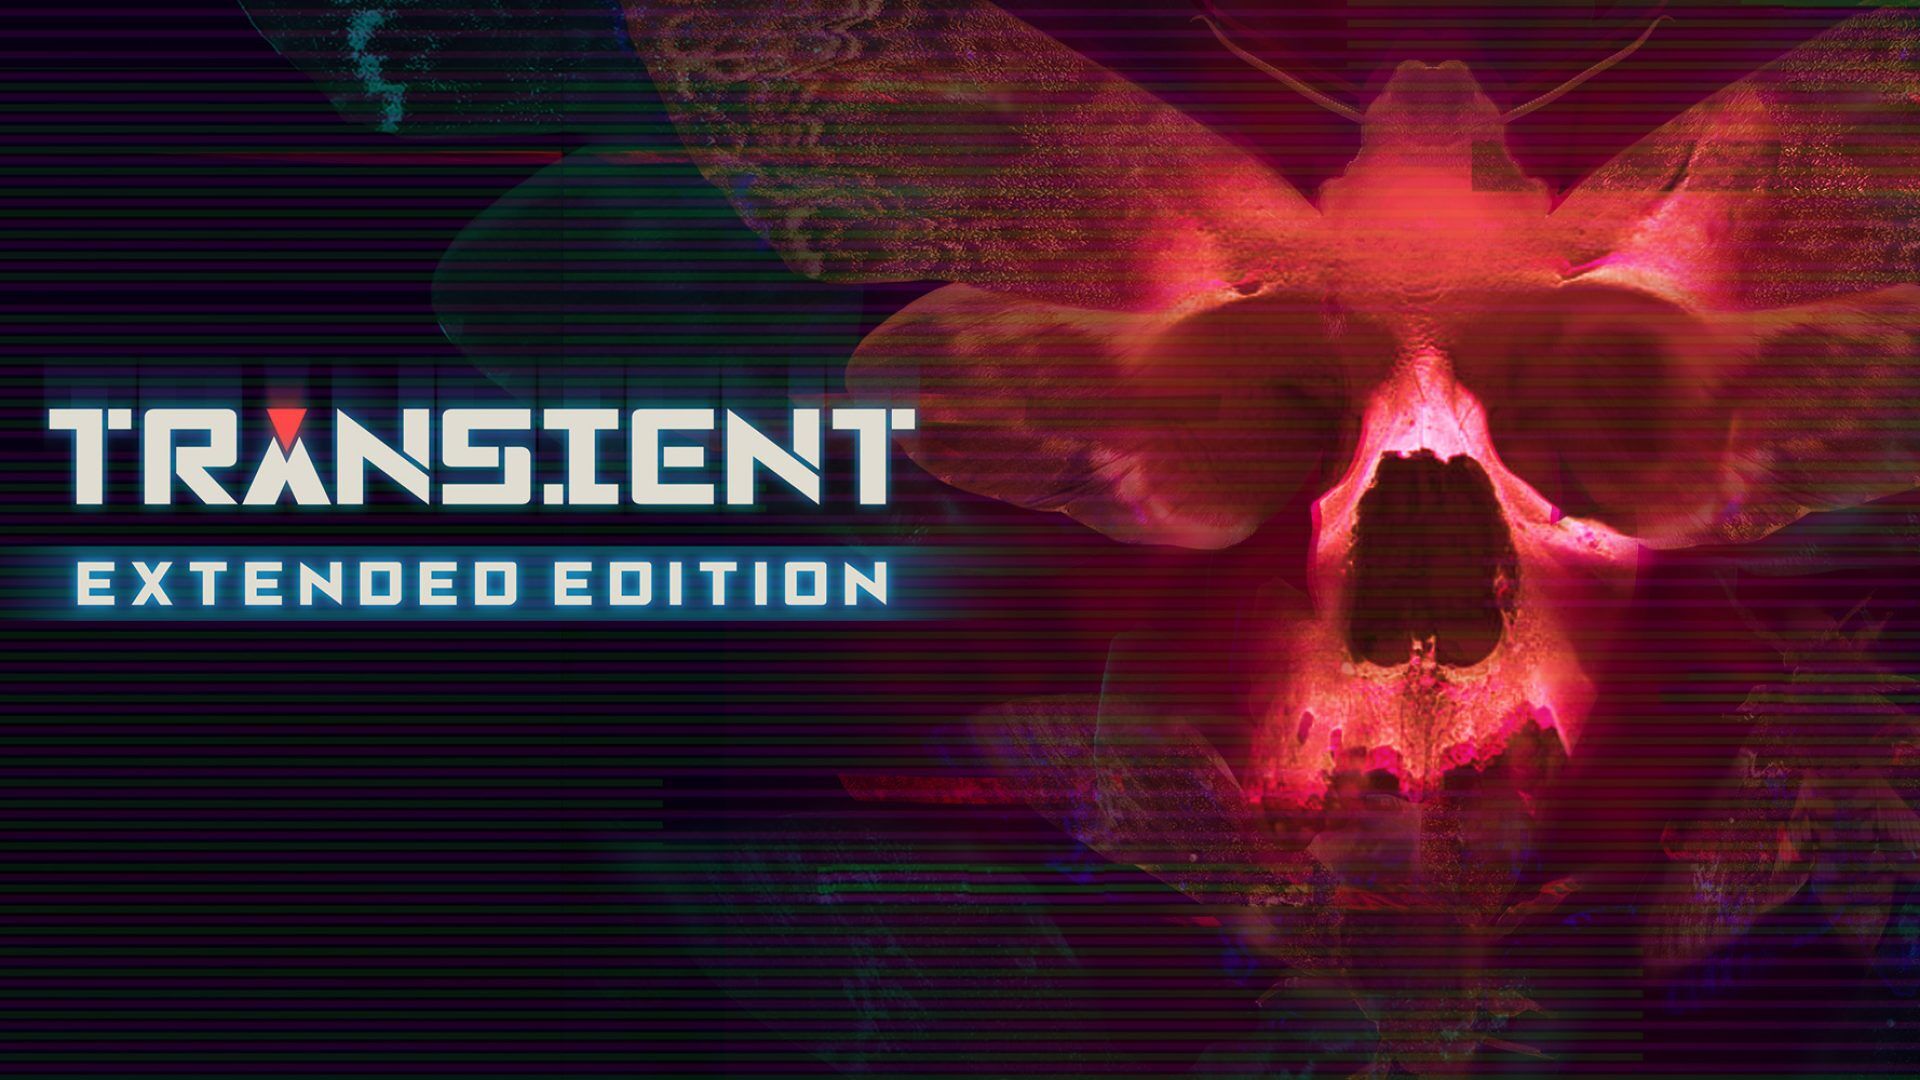 Transient: Extended Edition